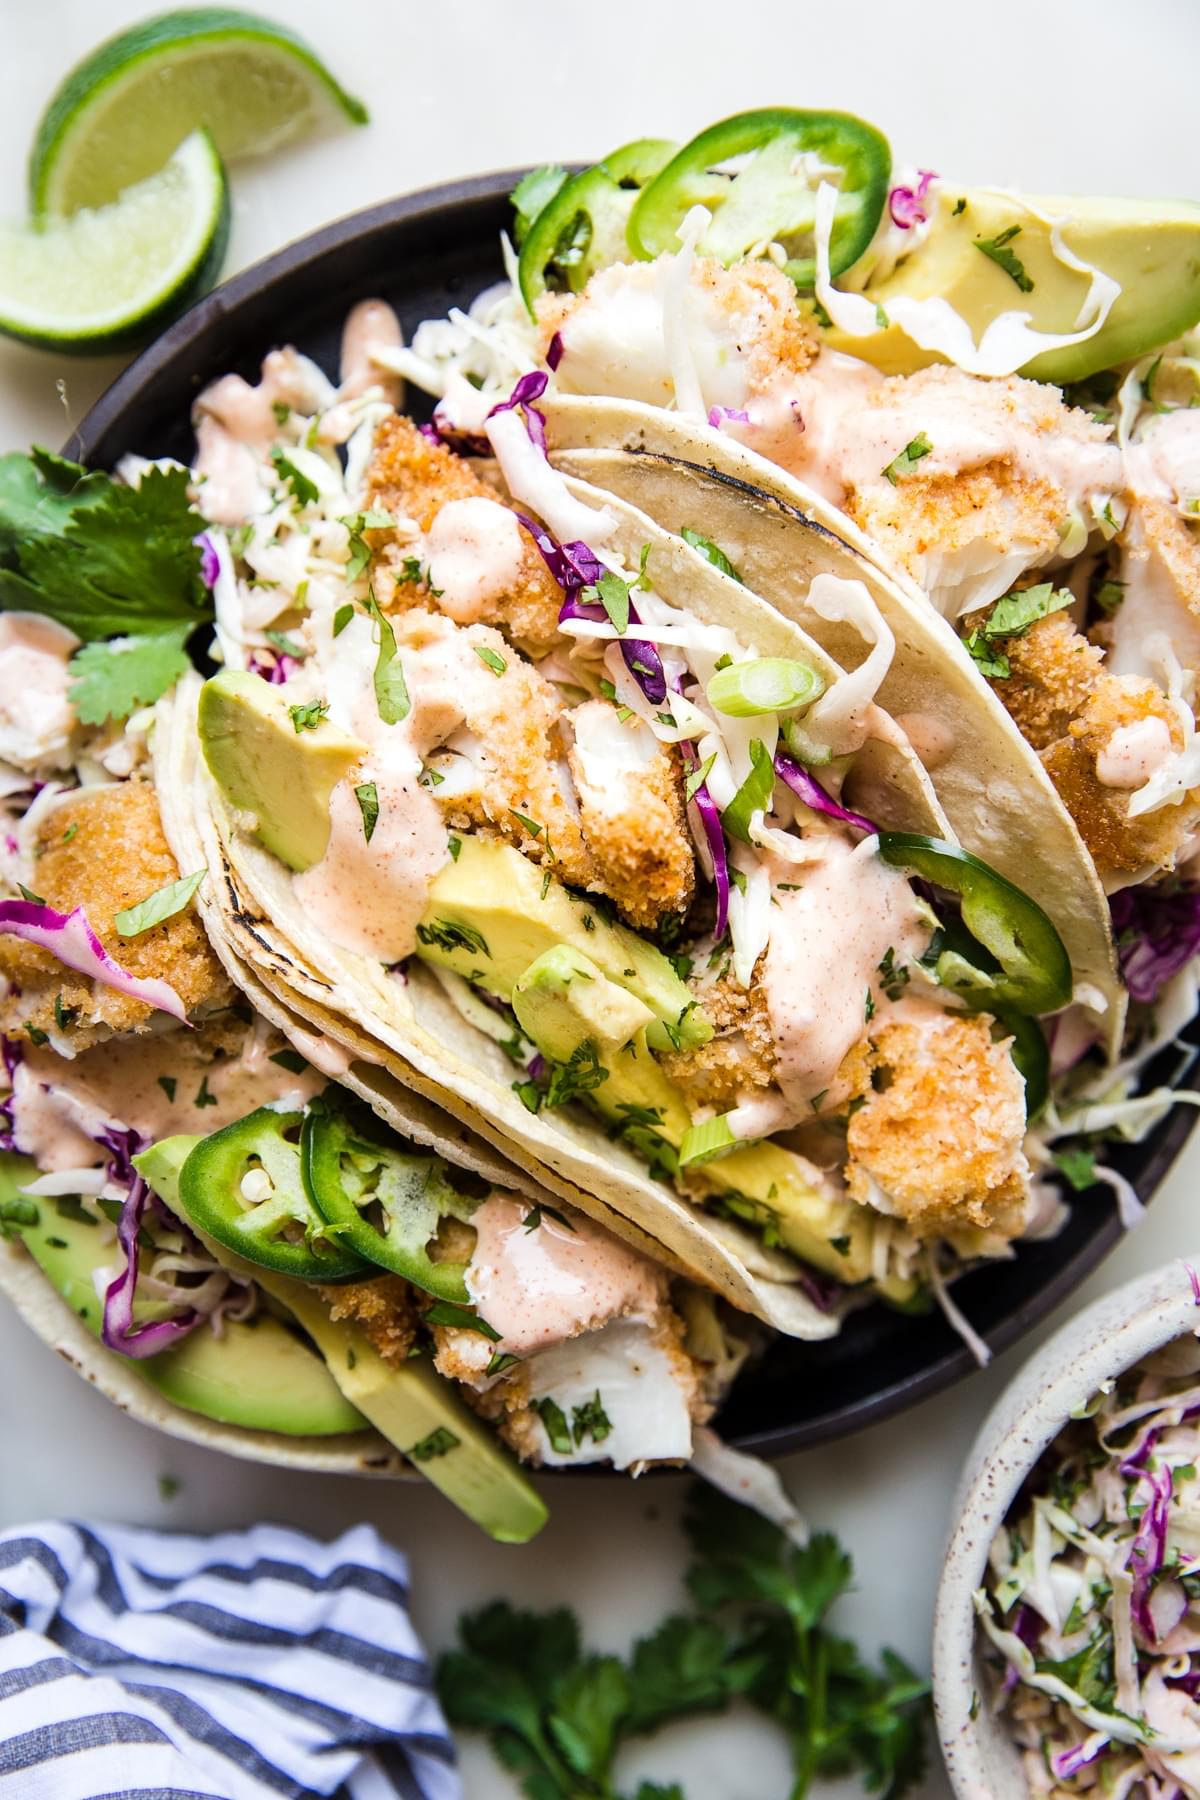 spicy fish tacos with avocado, coleslaw and fresh limes